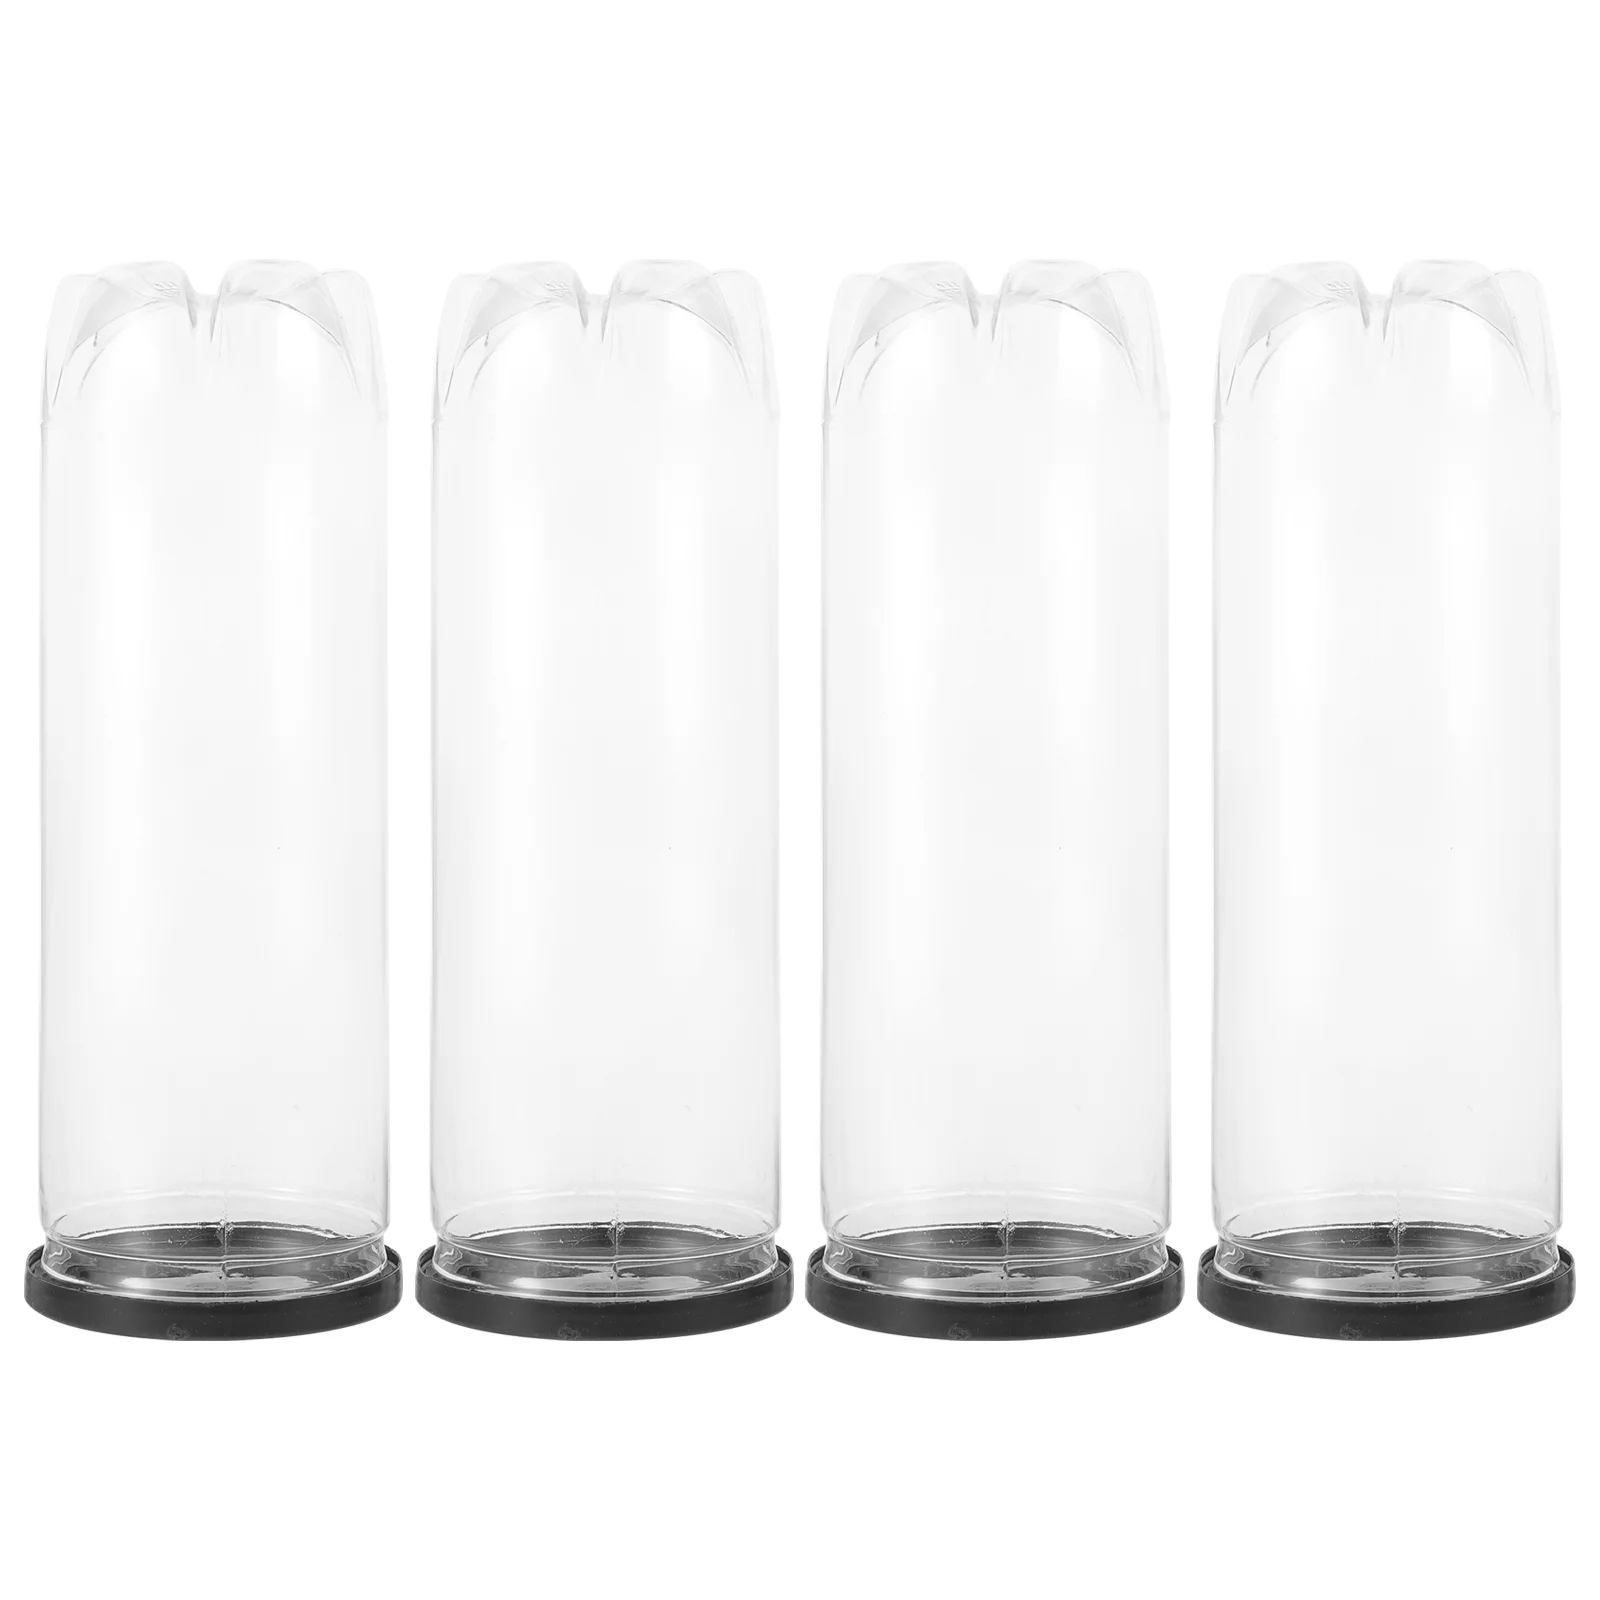 

4 Pcs Tennis Cylinder Holder with Cover Supply Ball Multi-function Balls Container Pvc Wear-resistant Organizer